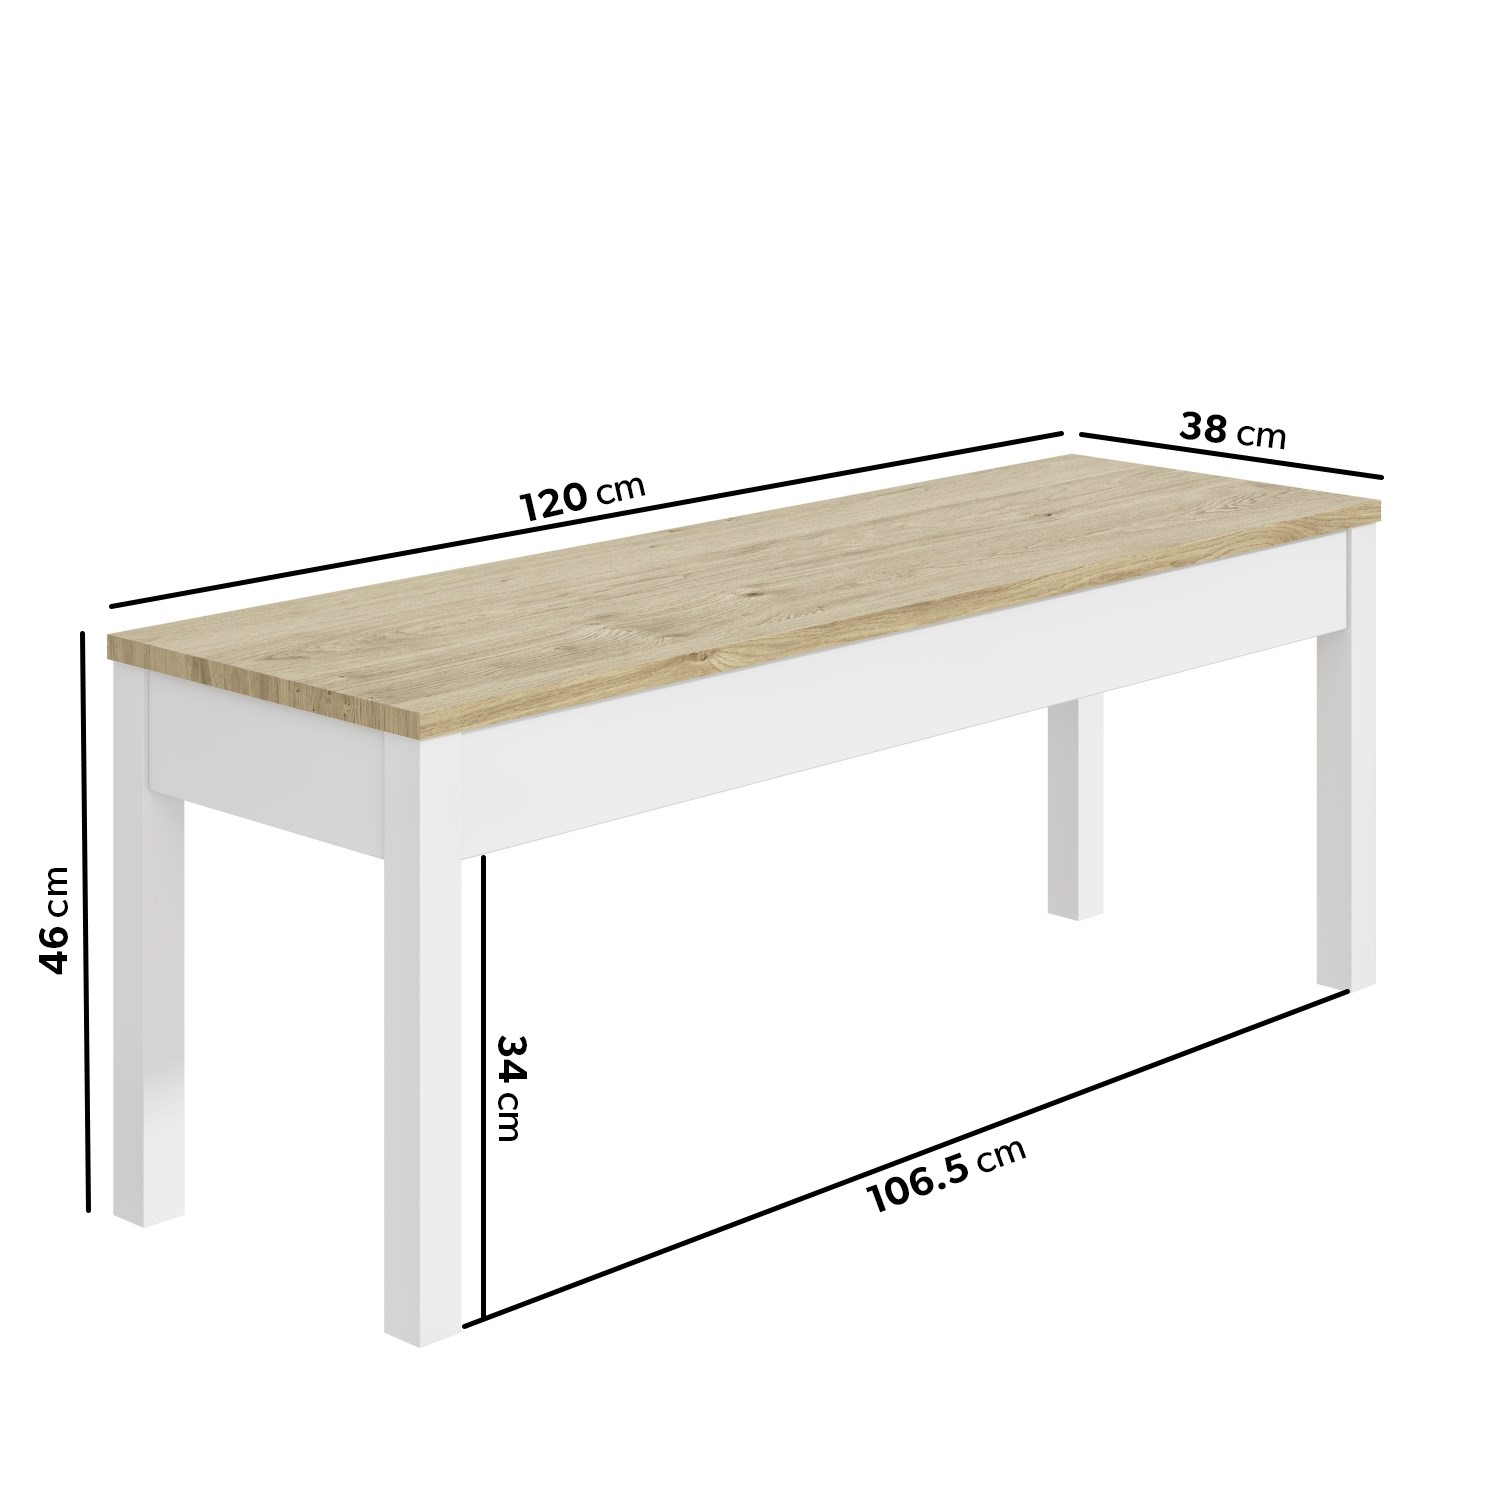 Read more about Large white & solid pine dining bench seats 2 emerson